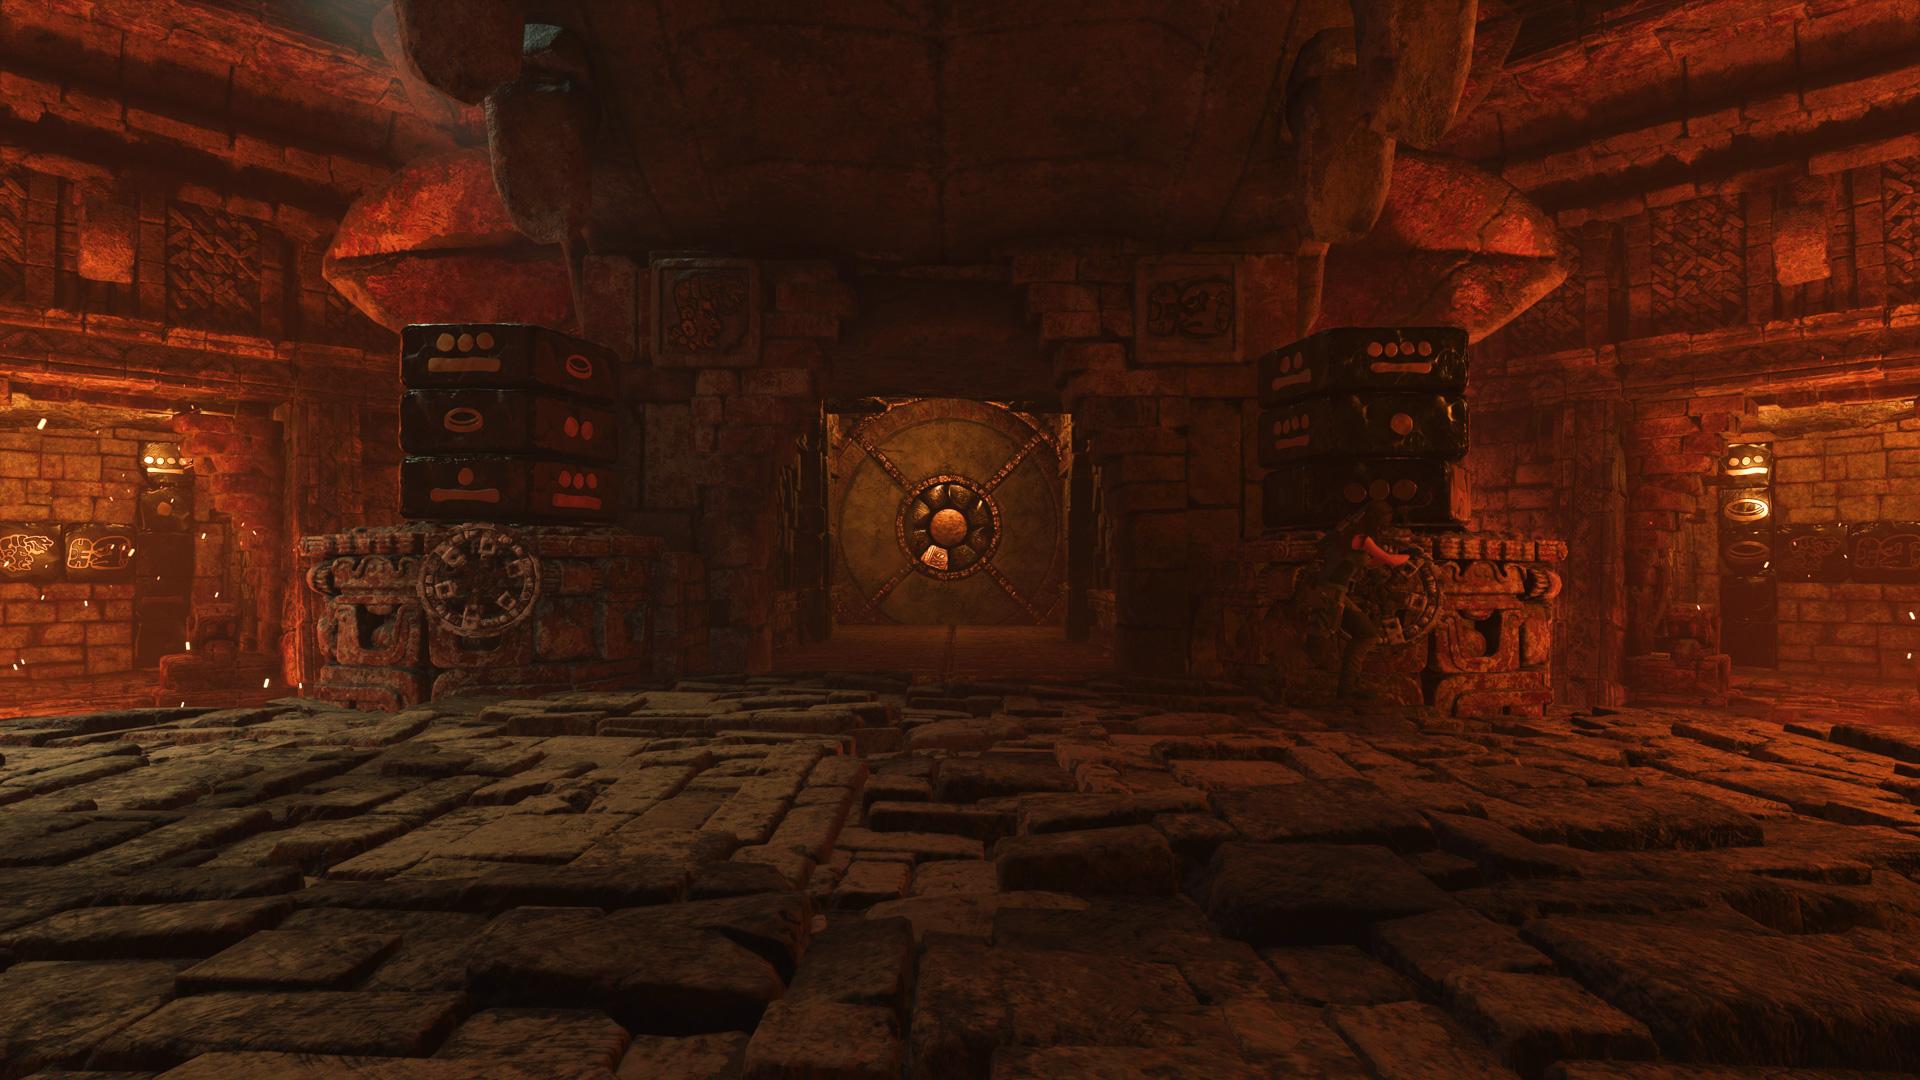 The Mayan calendar puzzle in the tomb in Kuwaq Yaku from Shadow of the Tomb Raider.